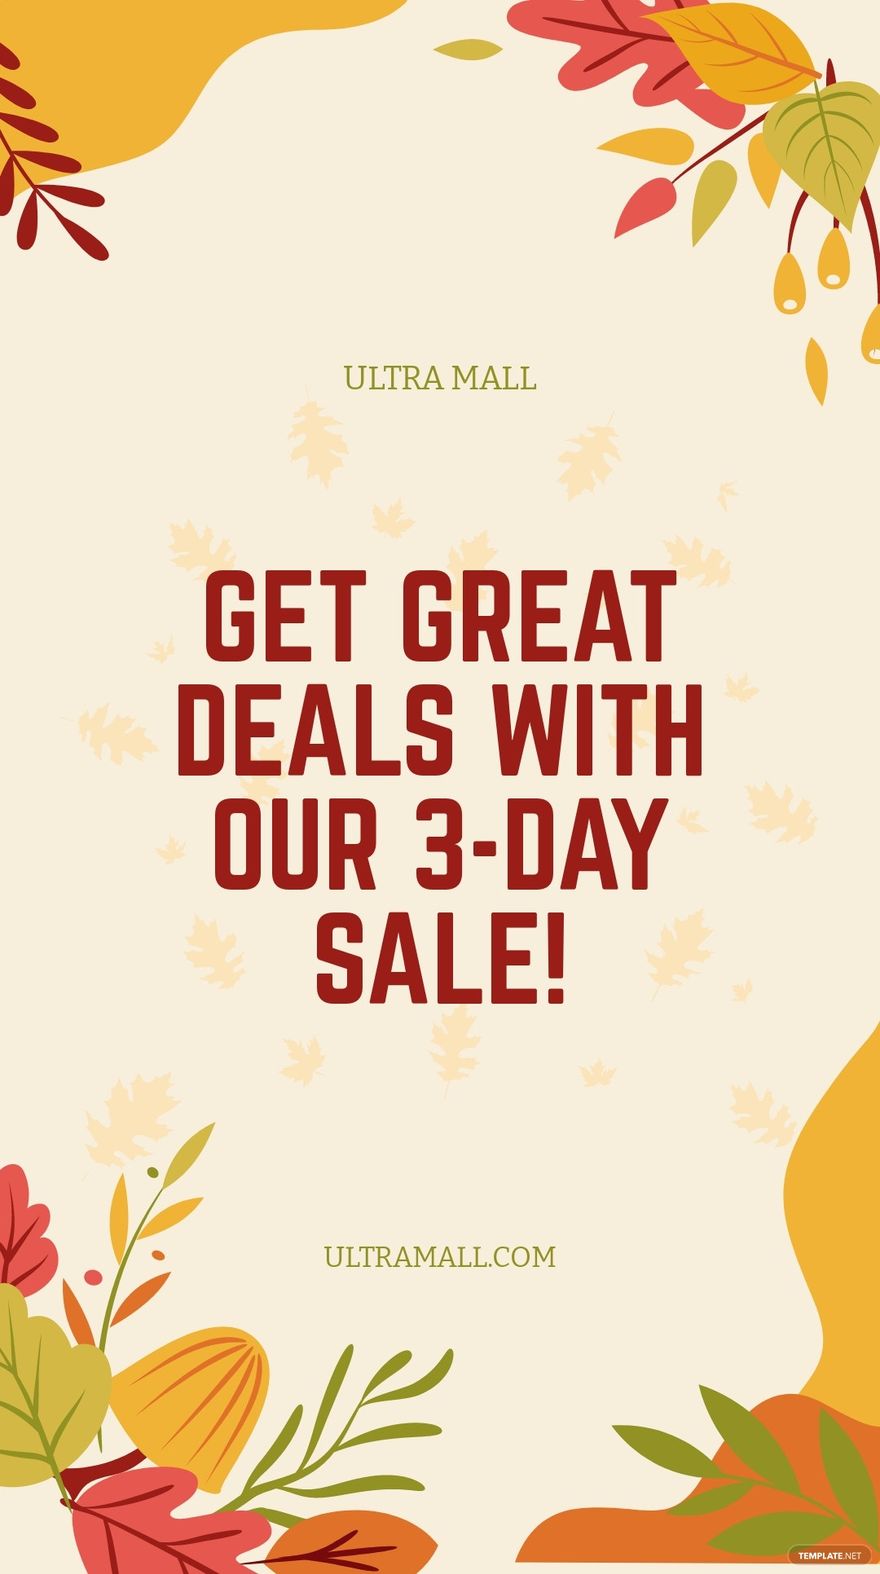 Fall/Autumn Sale Promotion Whatsapp Post Template